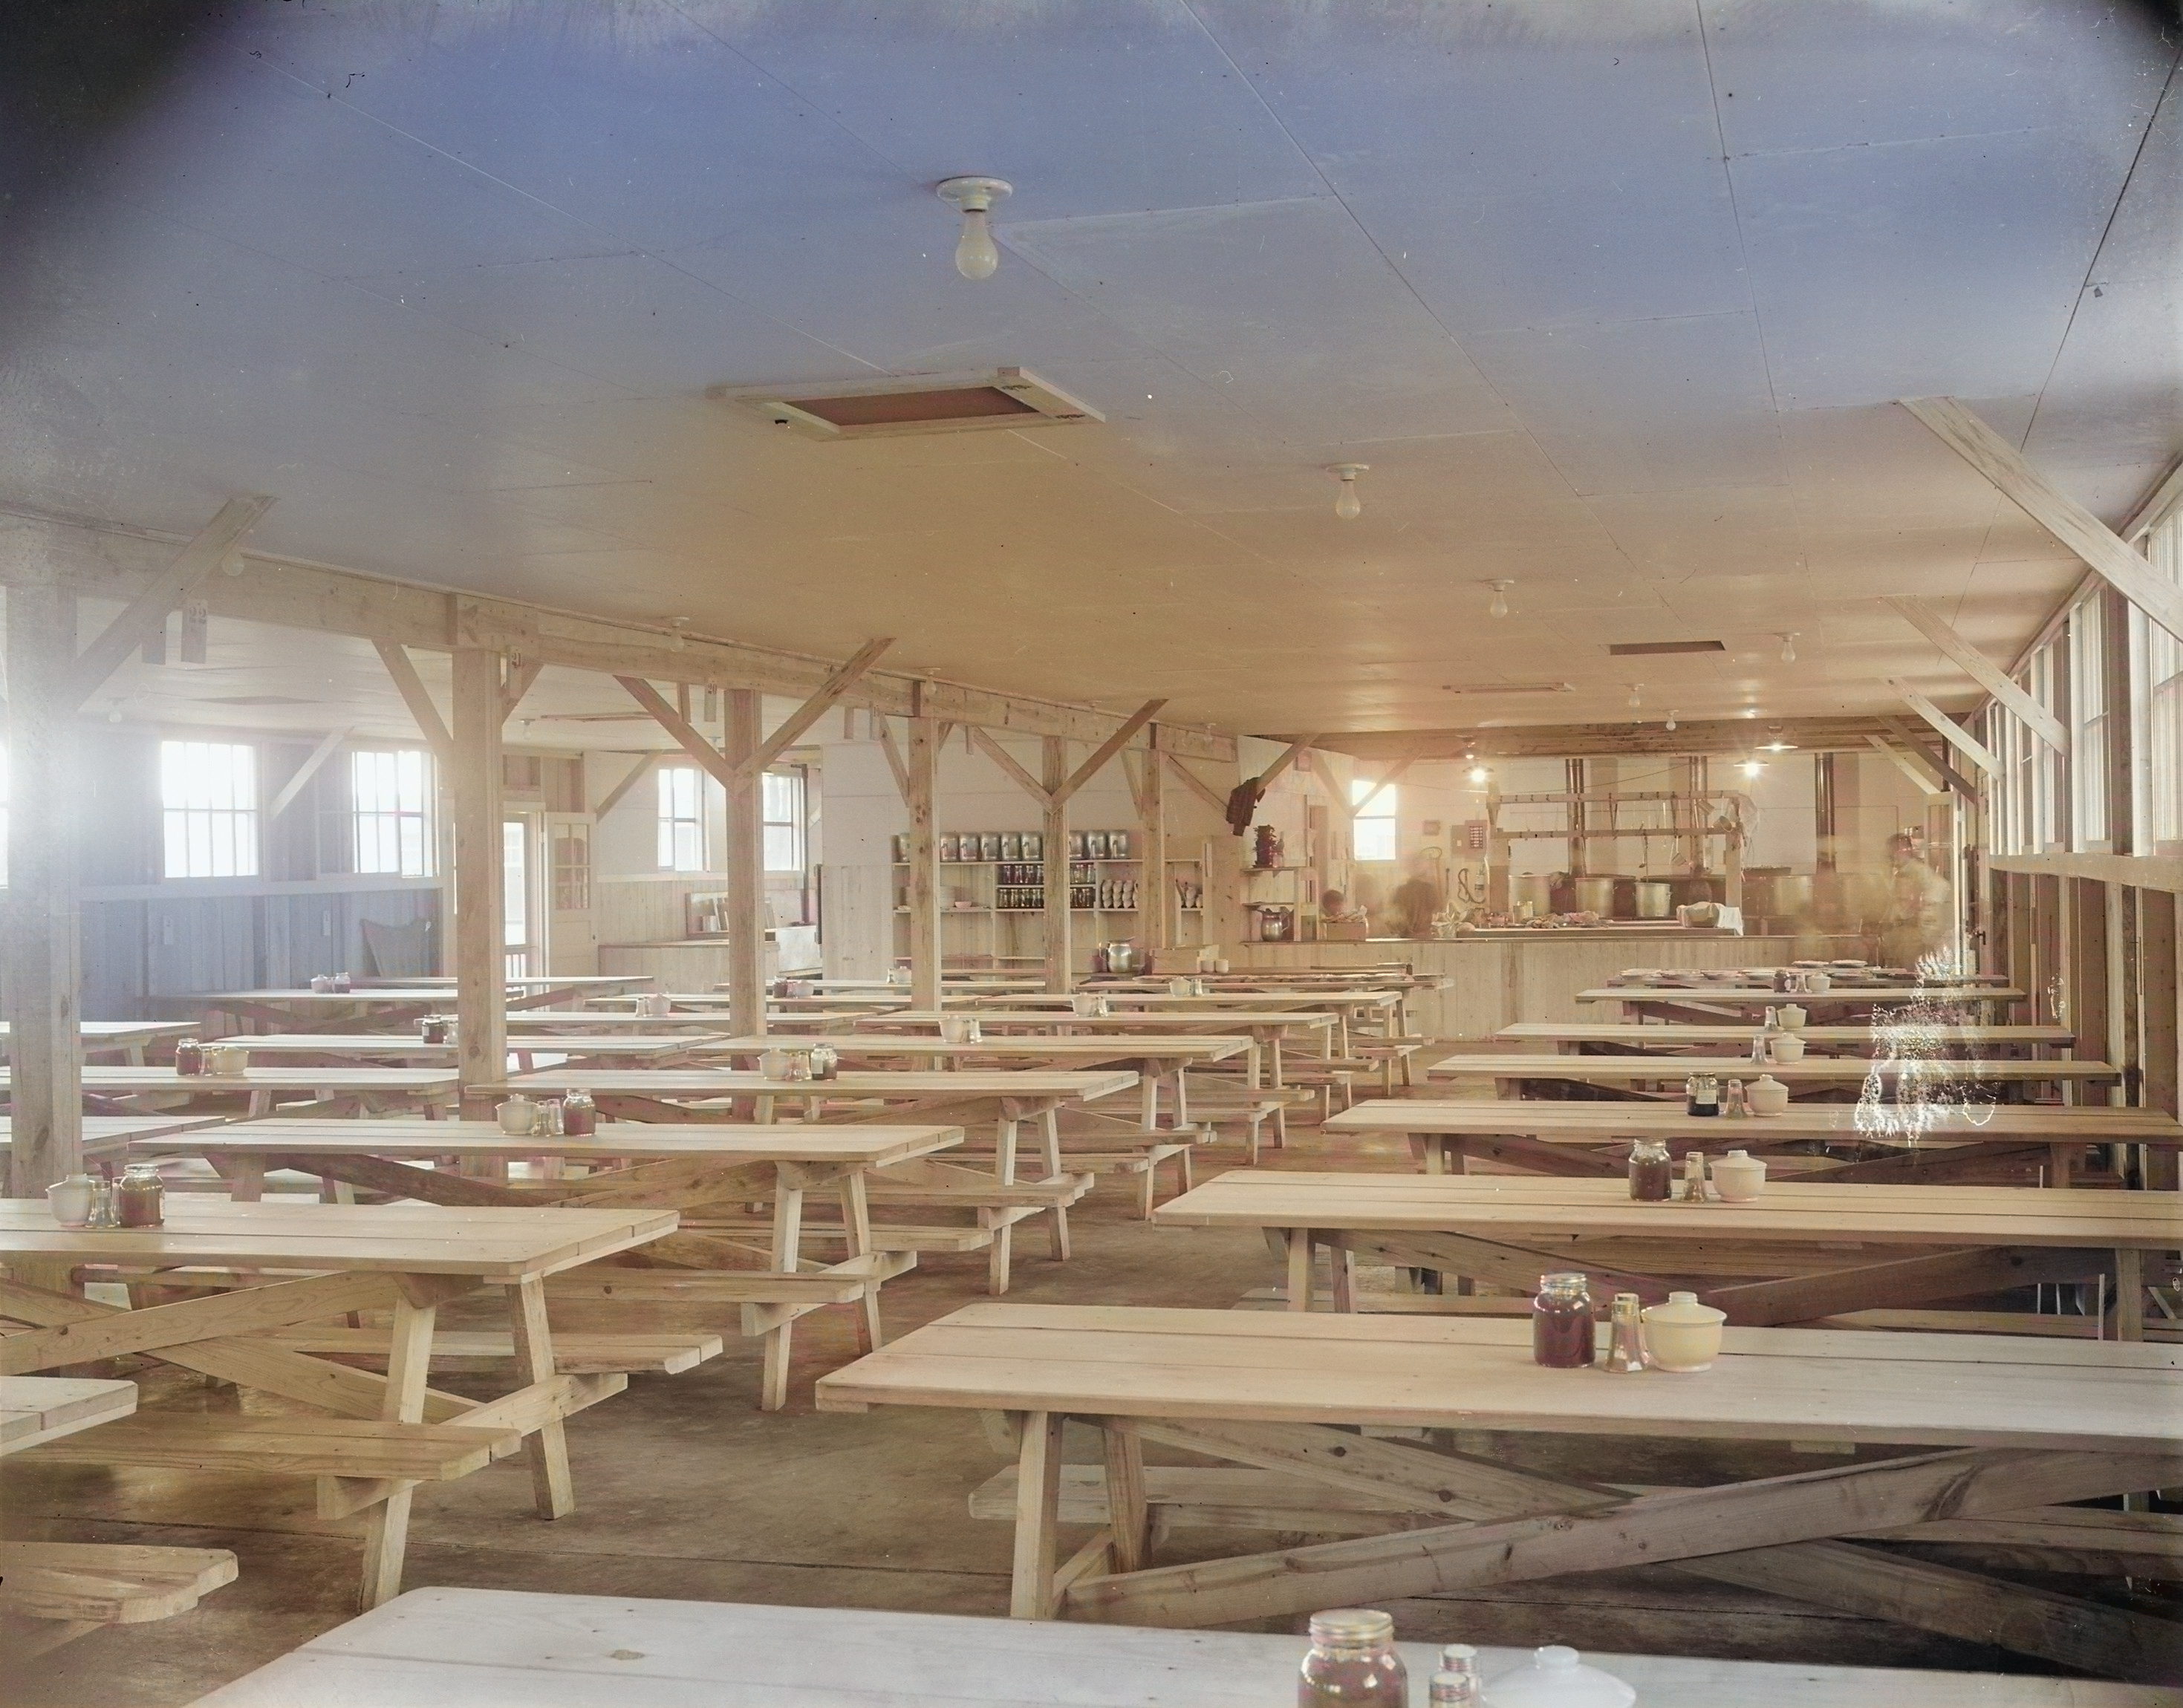 Mess hall of Block 7 of Jerome War Relocation Center, Arkansas, United States, 16 Nov 1942 [Colorized by WW2DB]